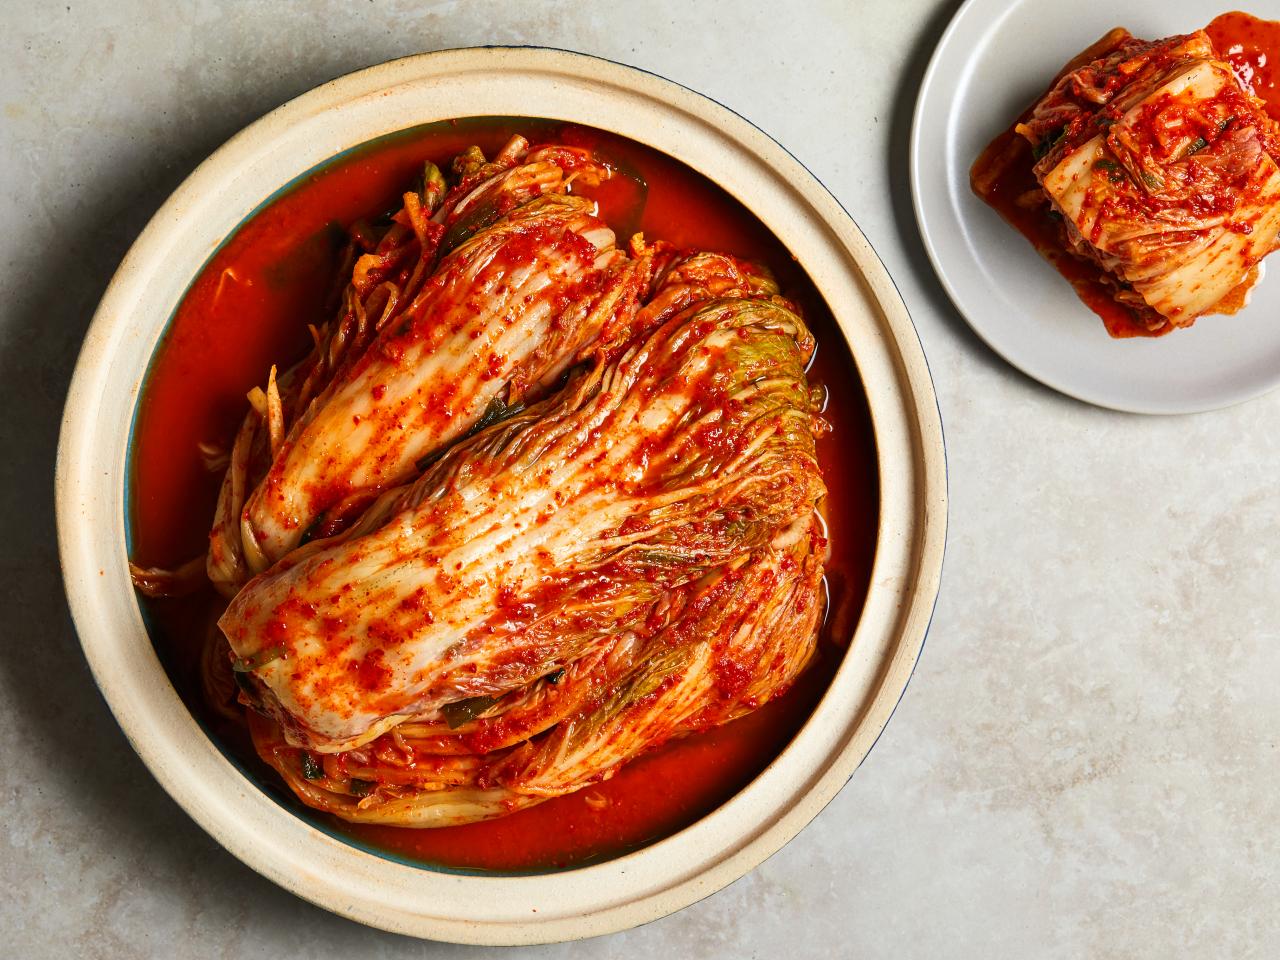 How To Make Kimchi, What Is Kimchi?